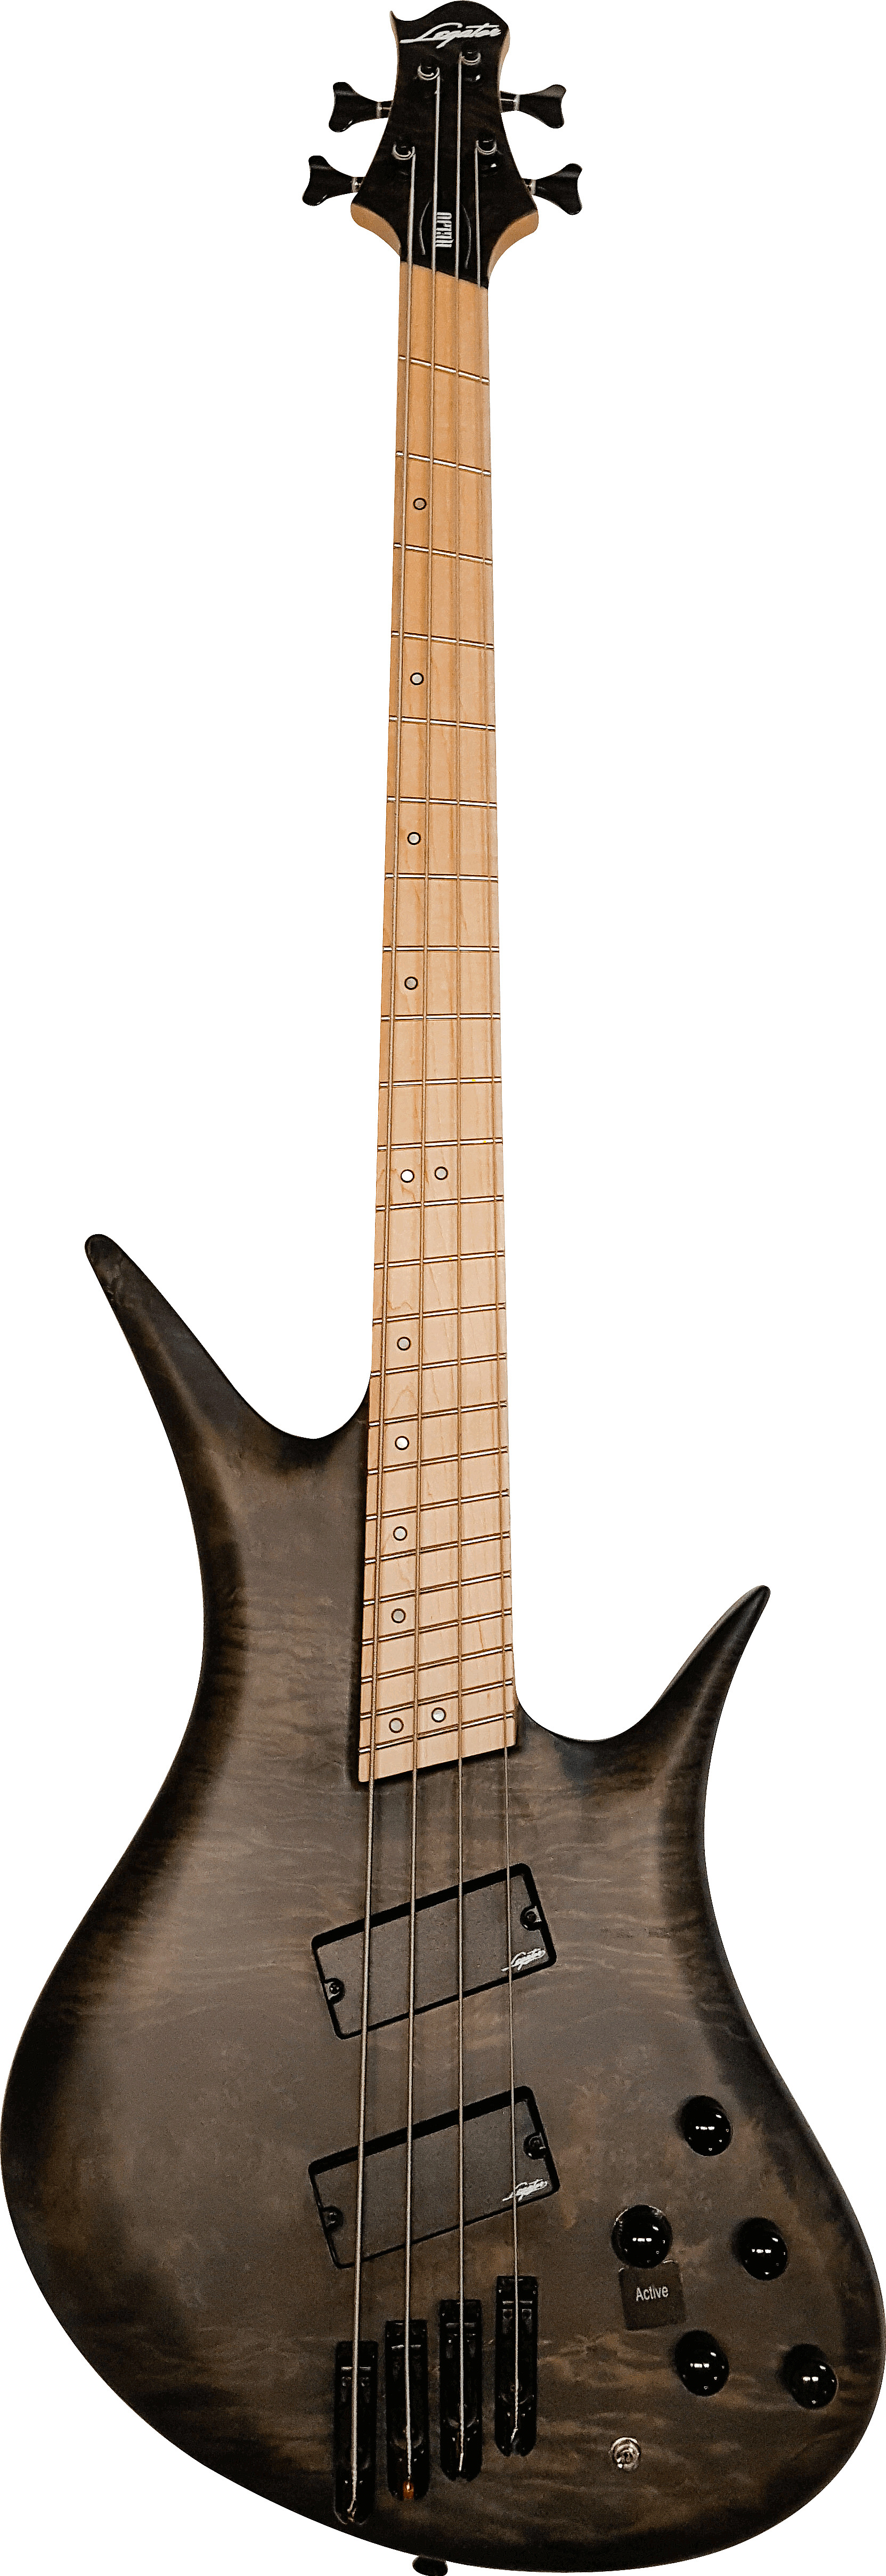 2018 Helio Multi Scale Bass 300-PRO X Series 4-String by Legator Guitars